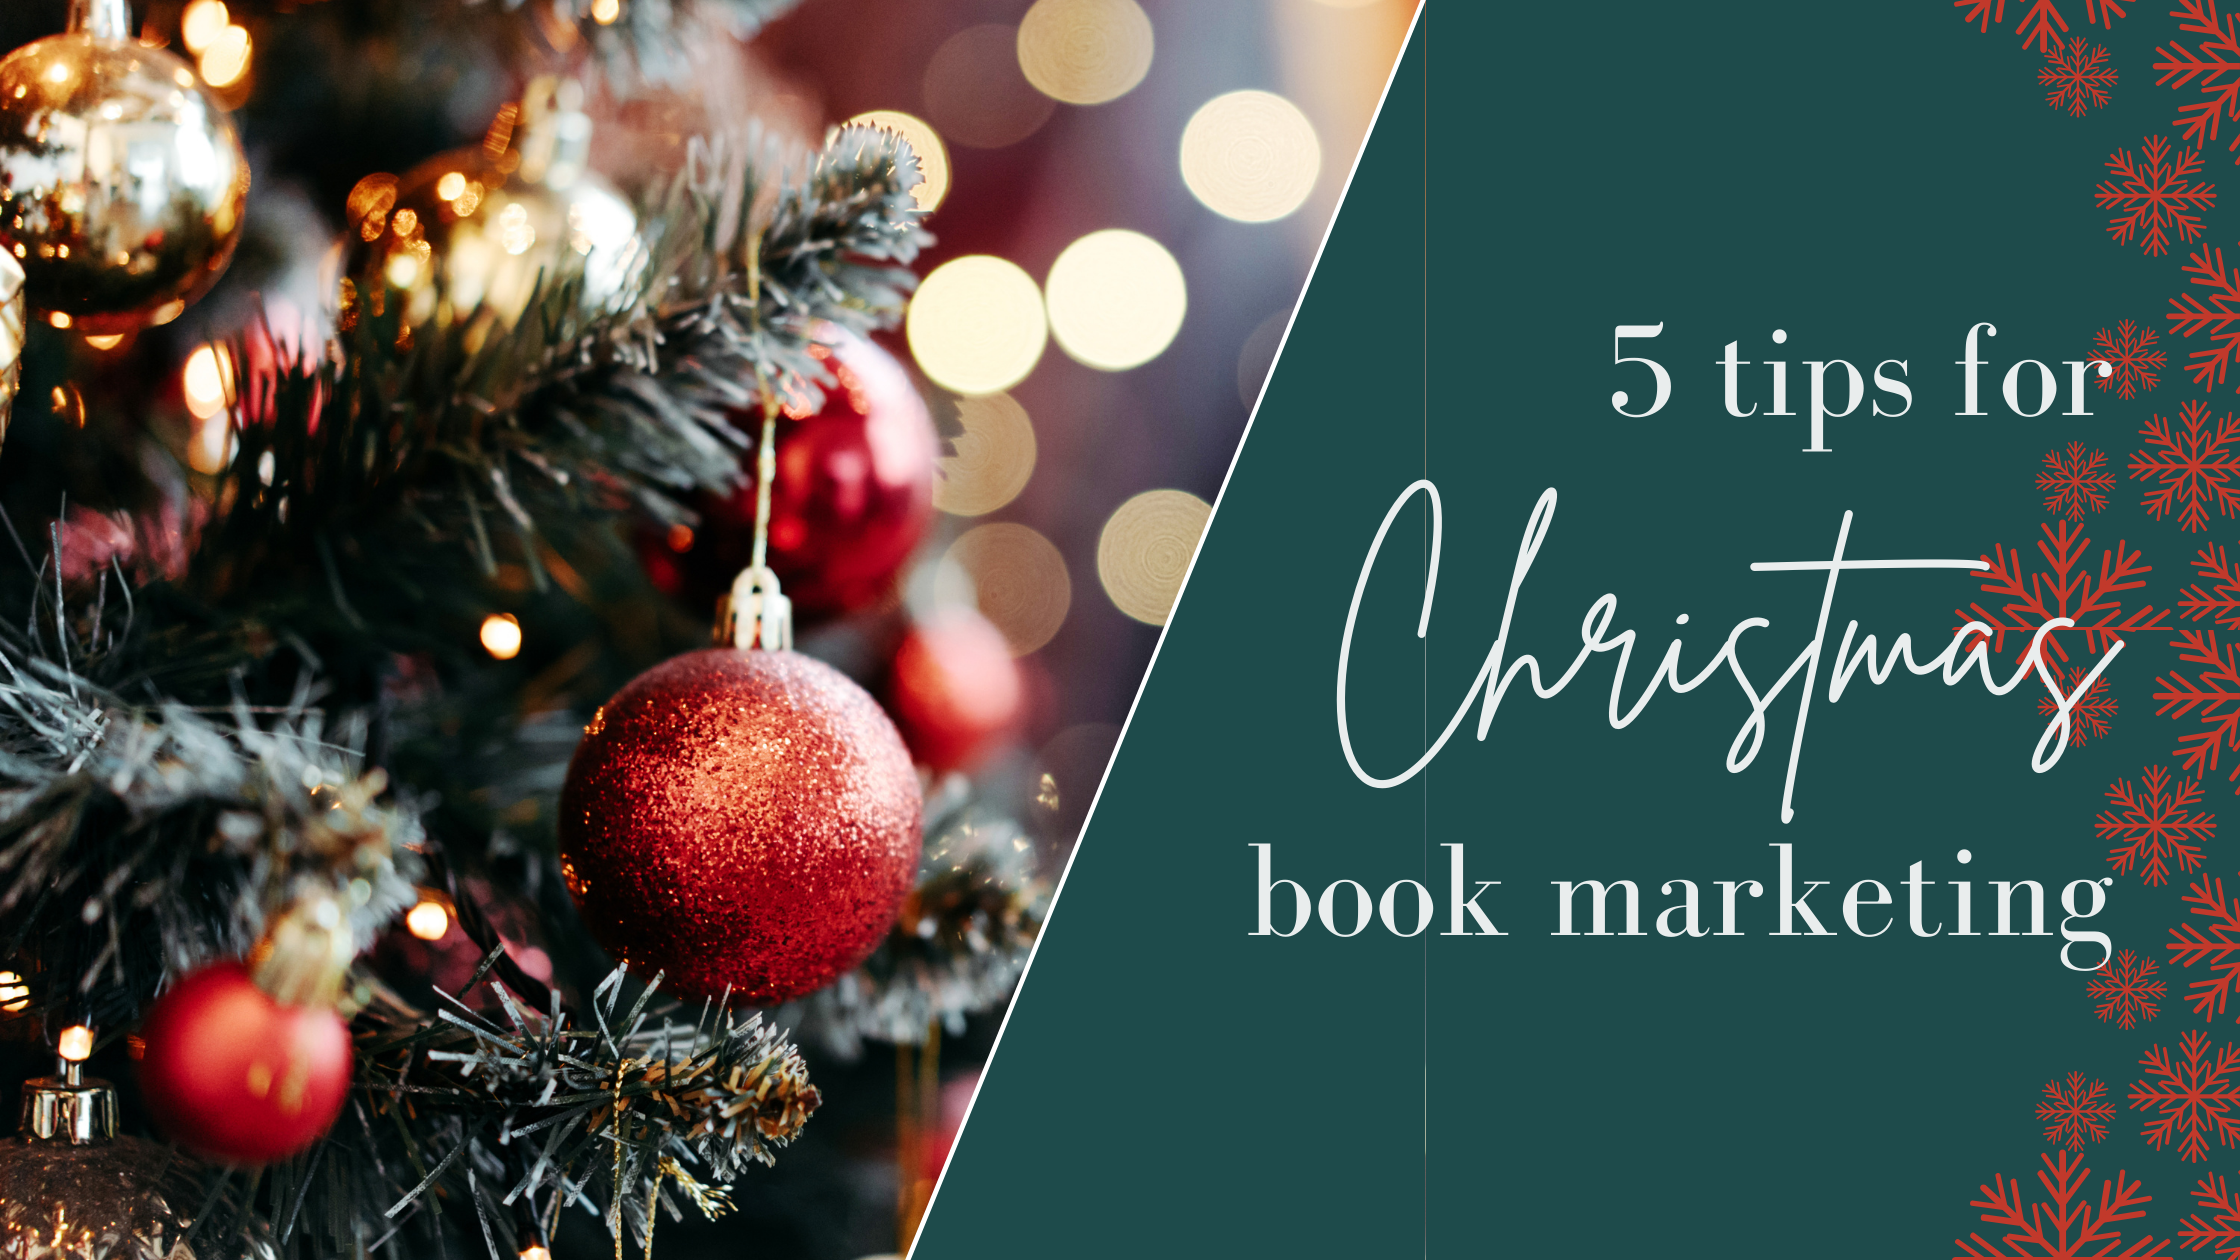 5 Festive Tips to Market Your Book this Christmas